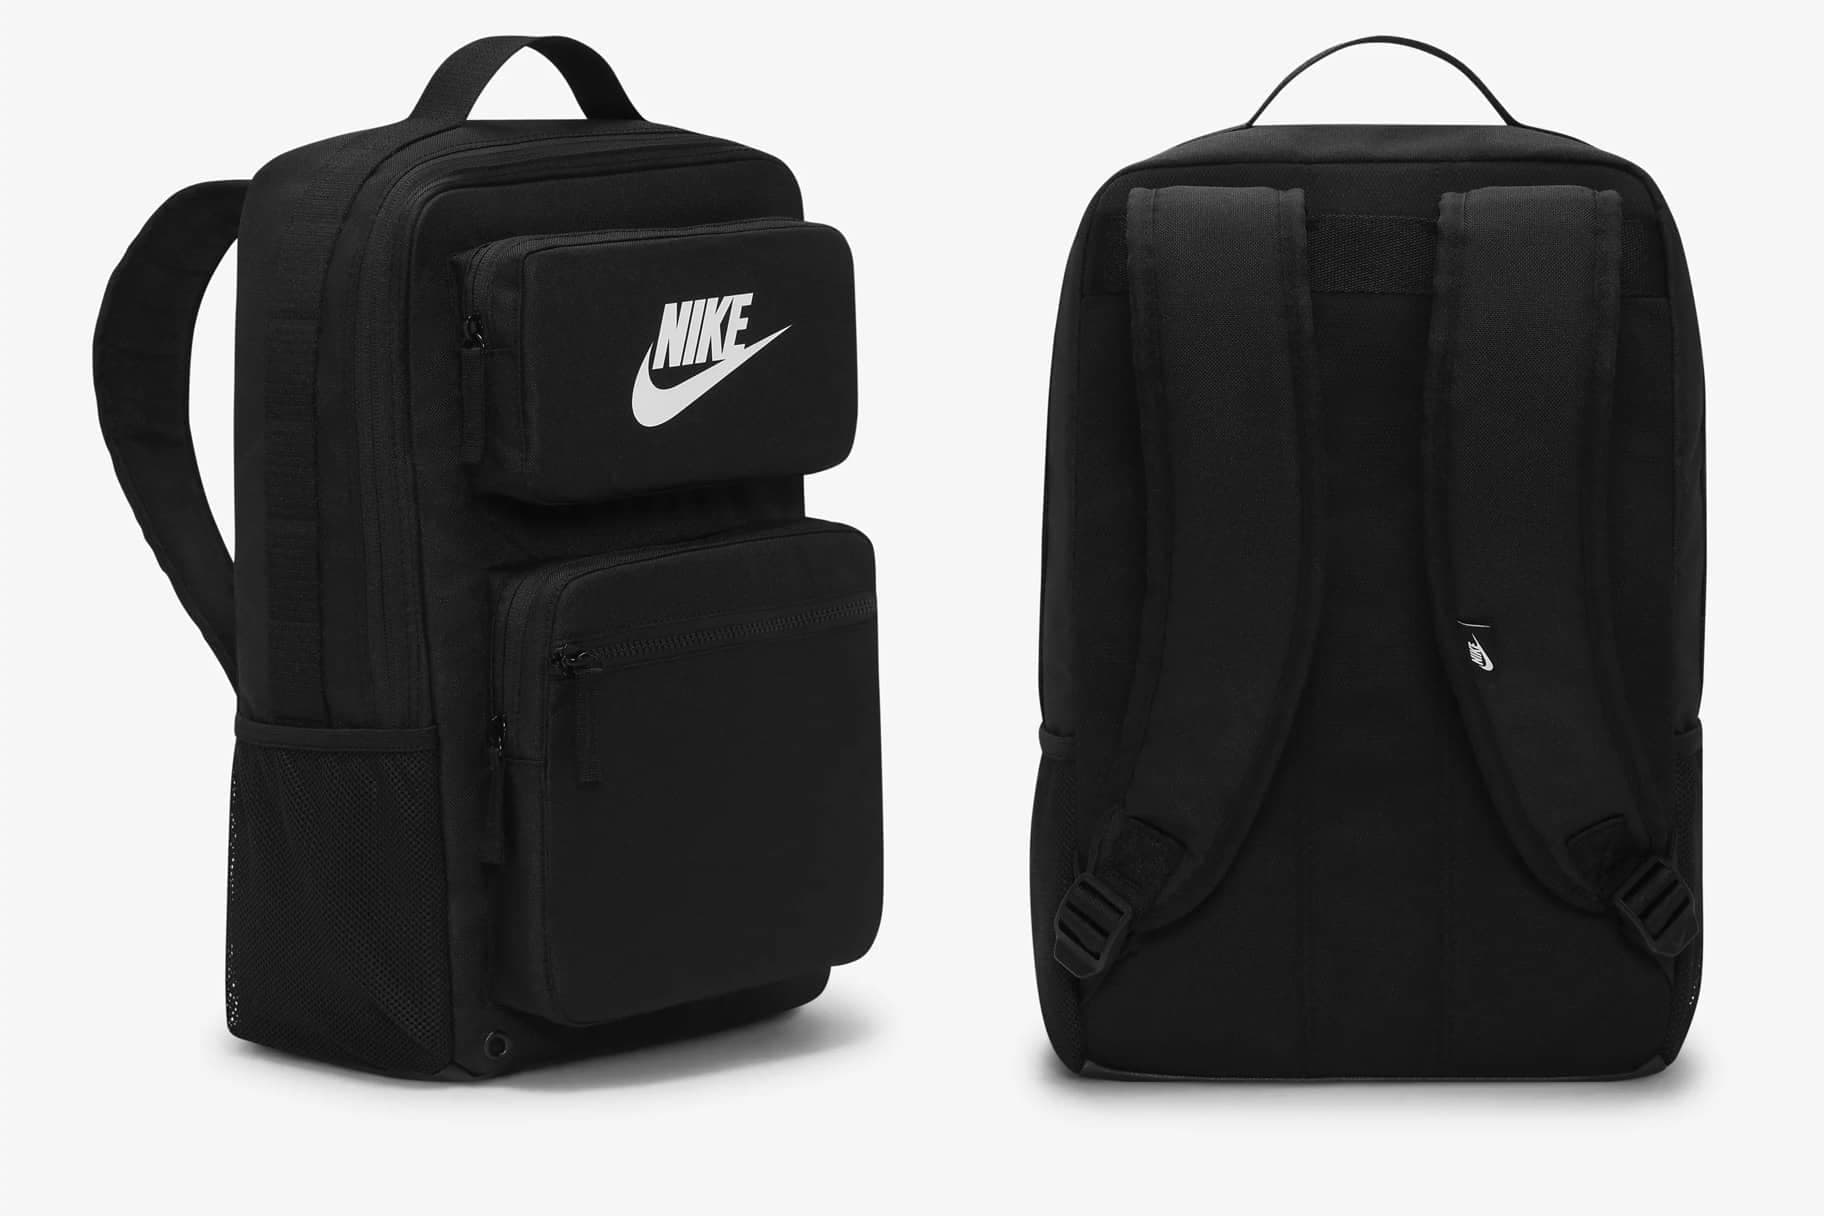 Heres how to properly wear your backpack! #backpack #backtoschool #bac, nike elite backpack